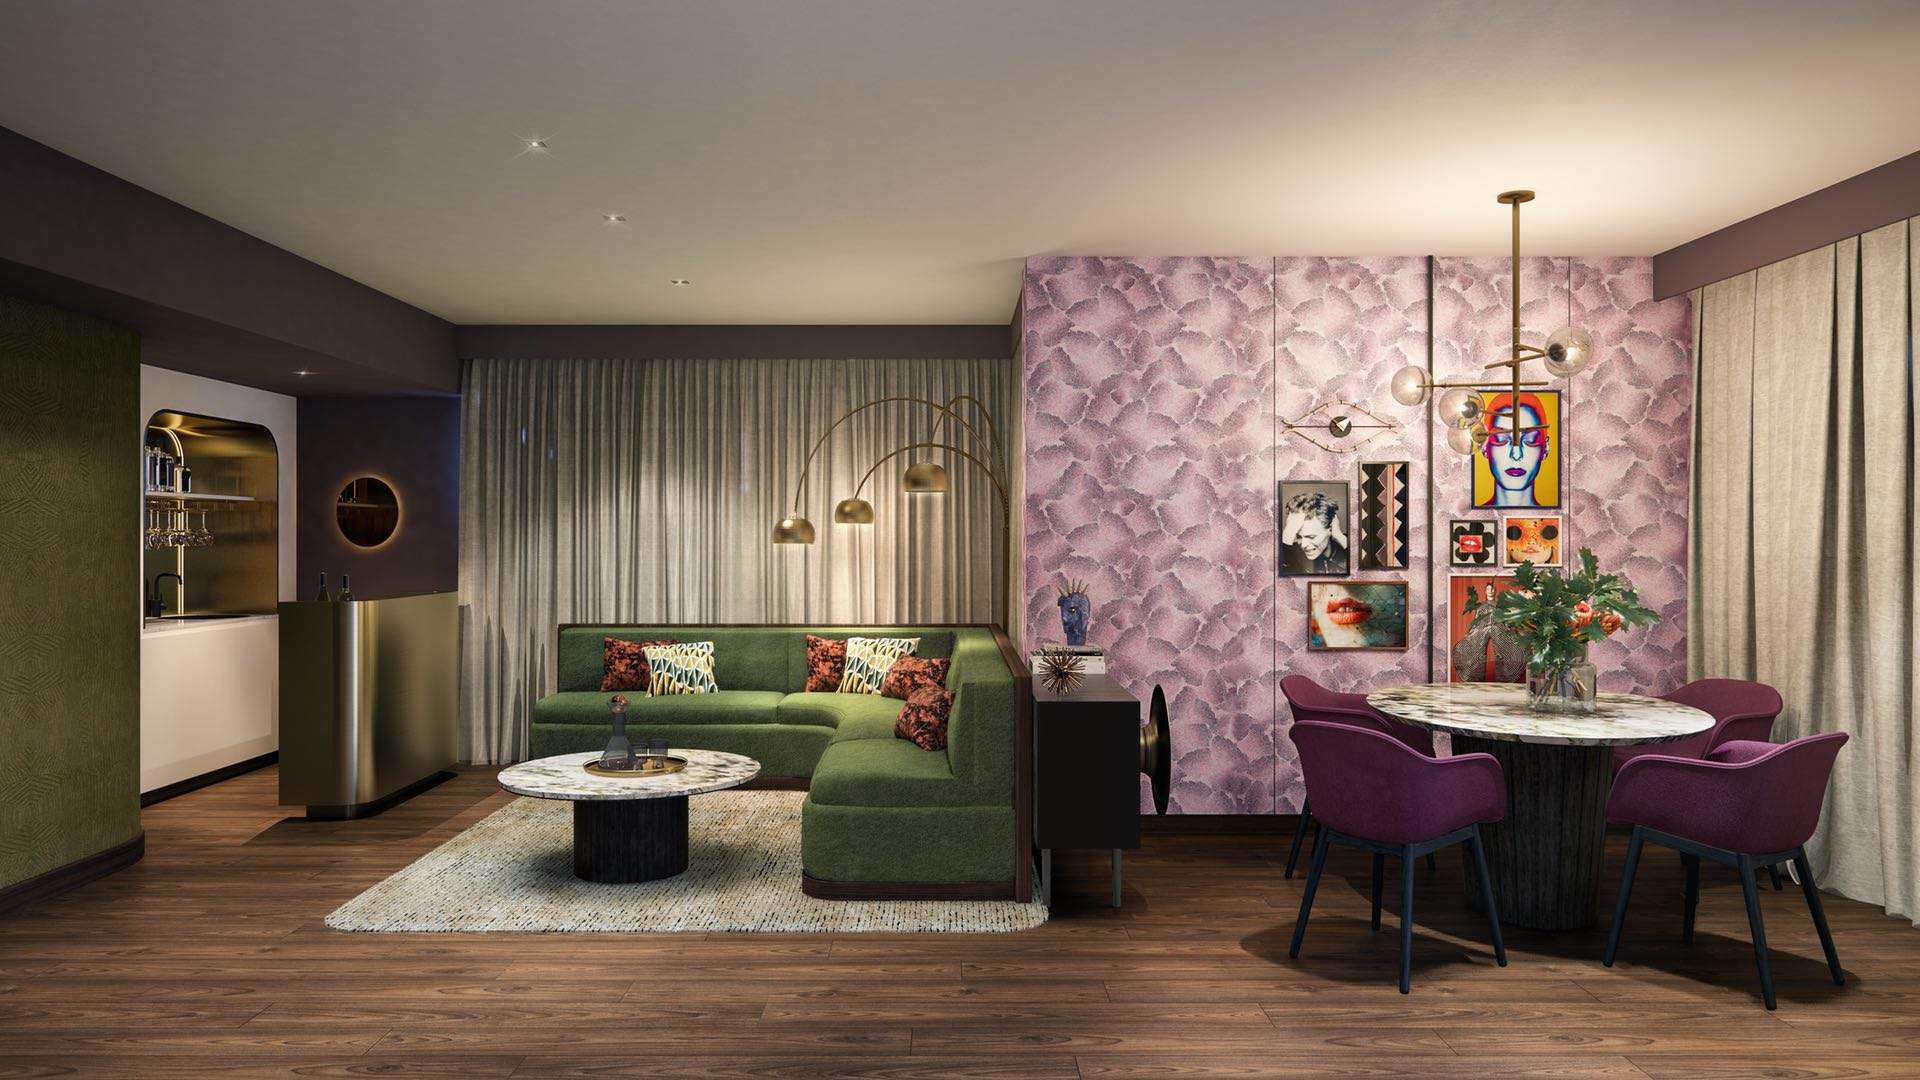 Luxe New Brisbane Hotel Ovolo The Valley Has Just Opened Its Rockstar-Inspired Doors